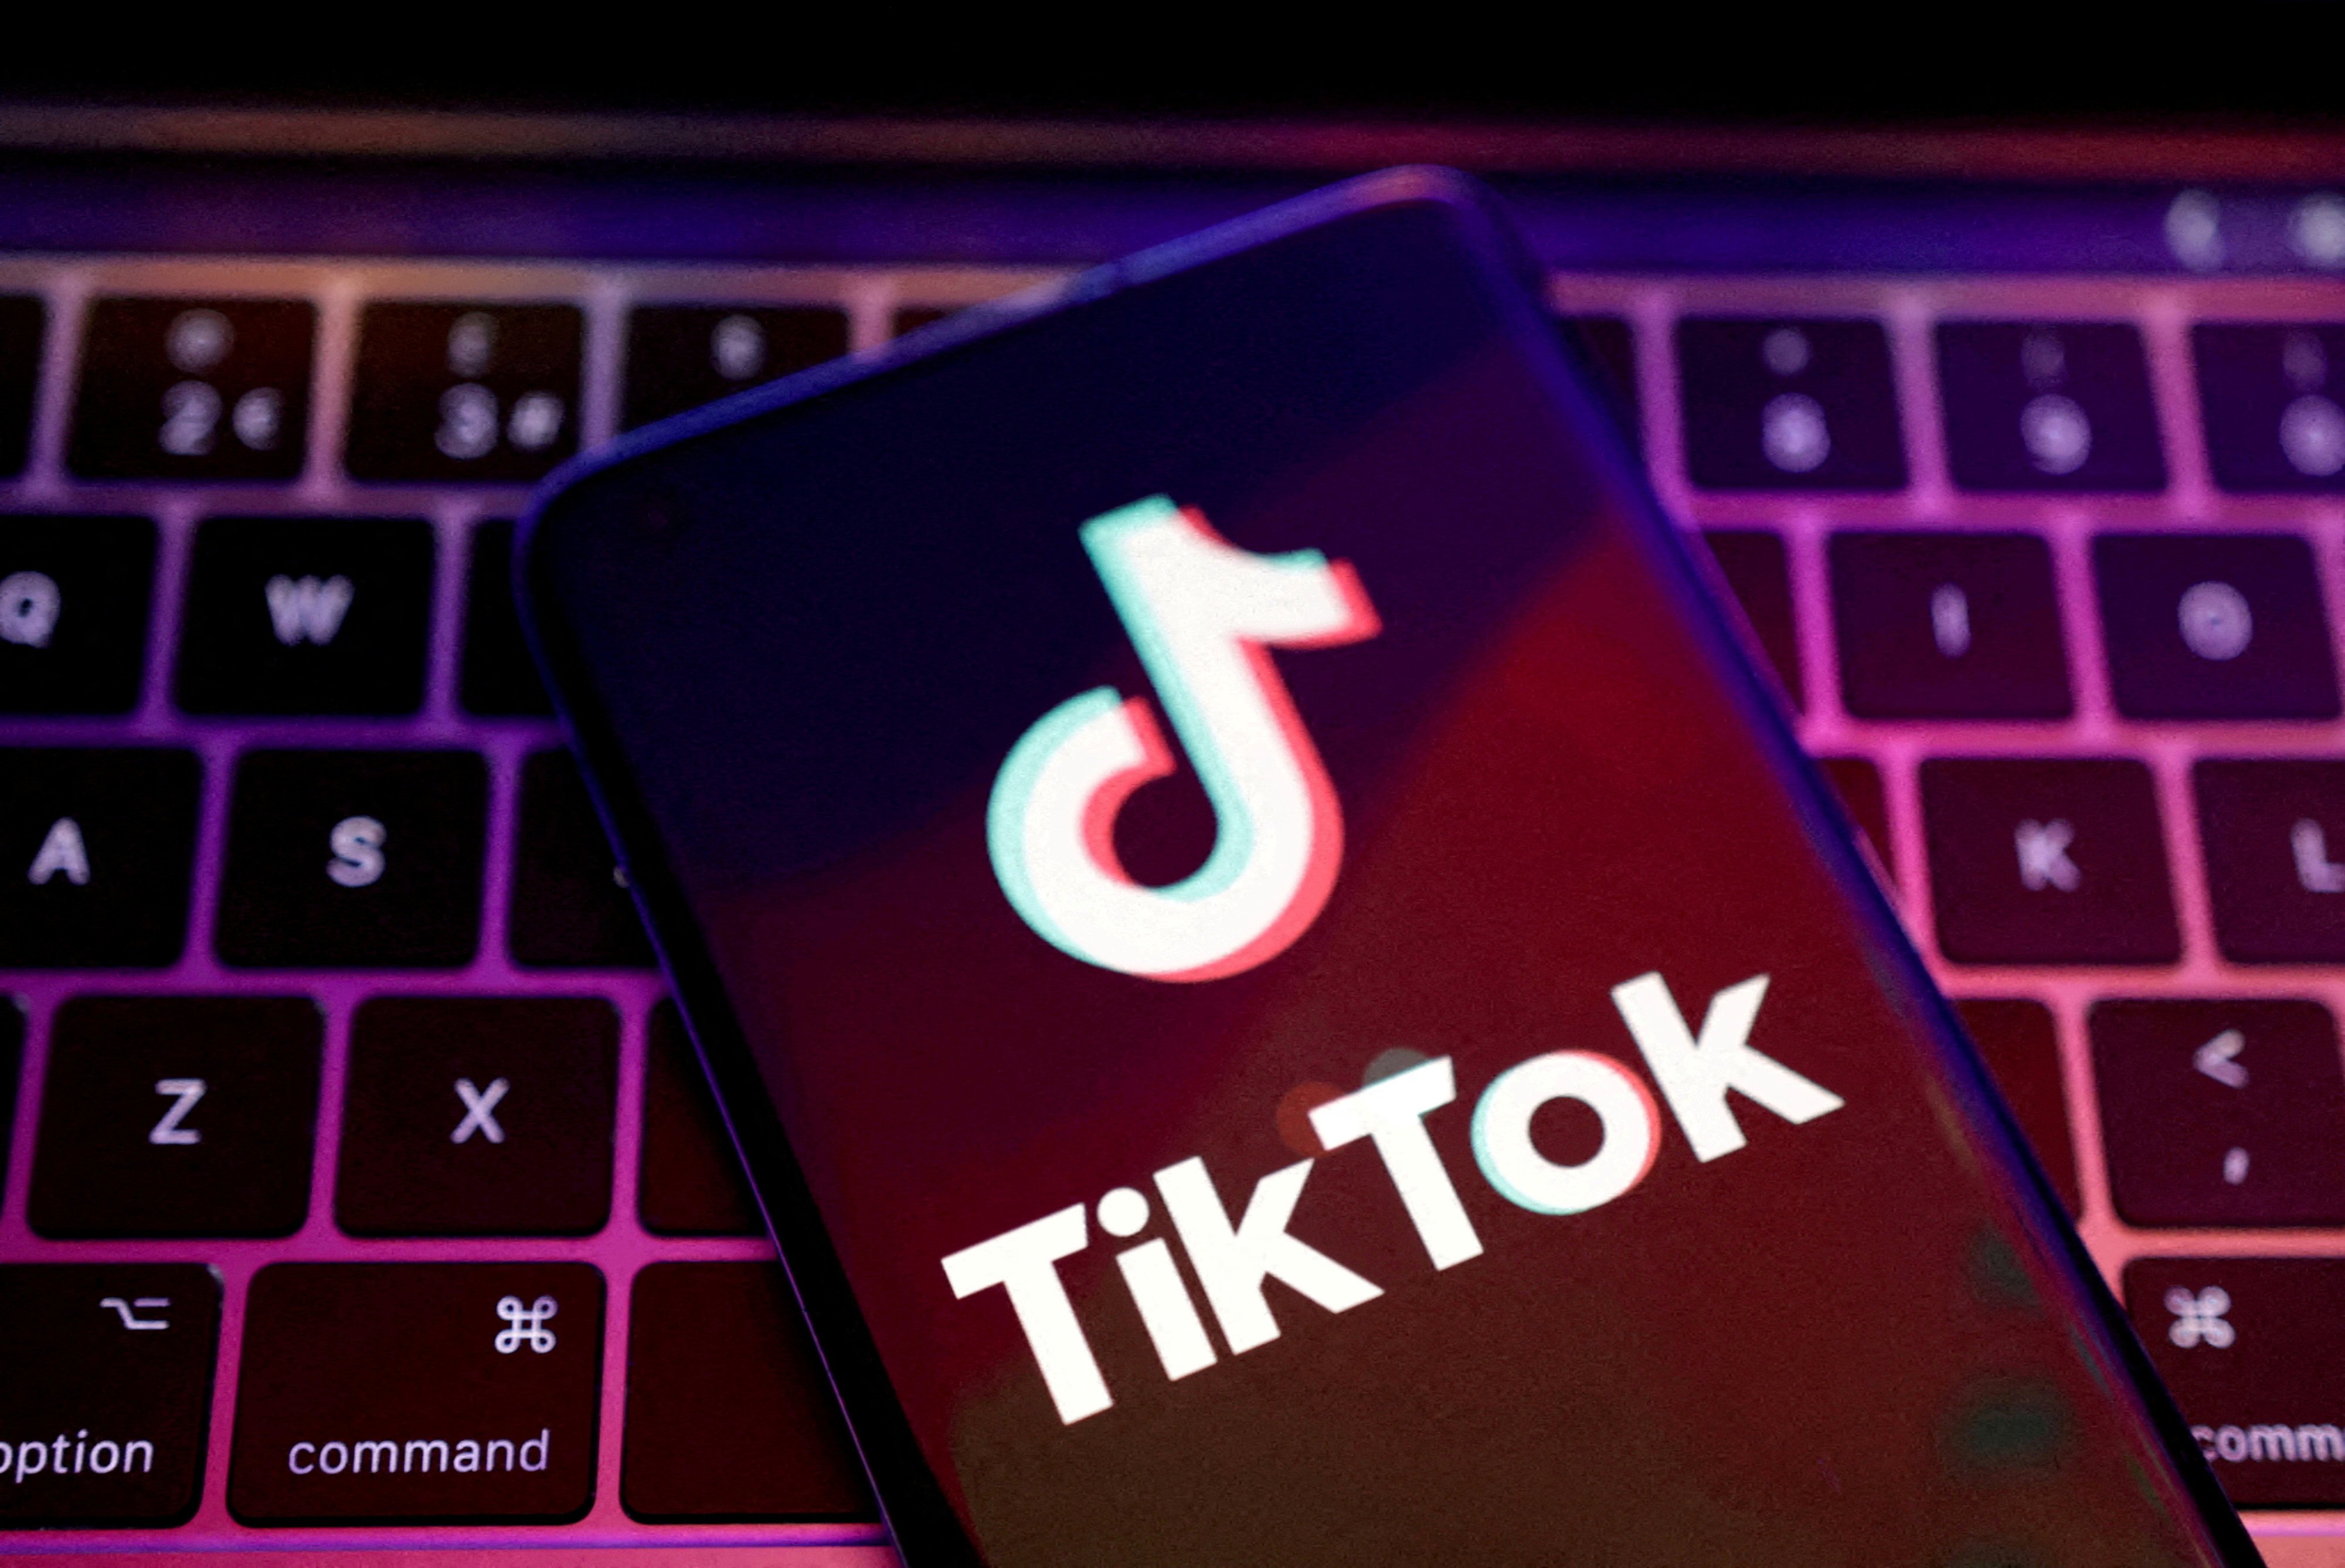 New legislation in the US threatens a nationwide ban on TikTok unless its China-based parent ByteDance divests. Photo: Reuters